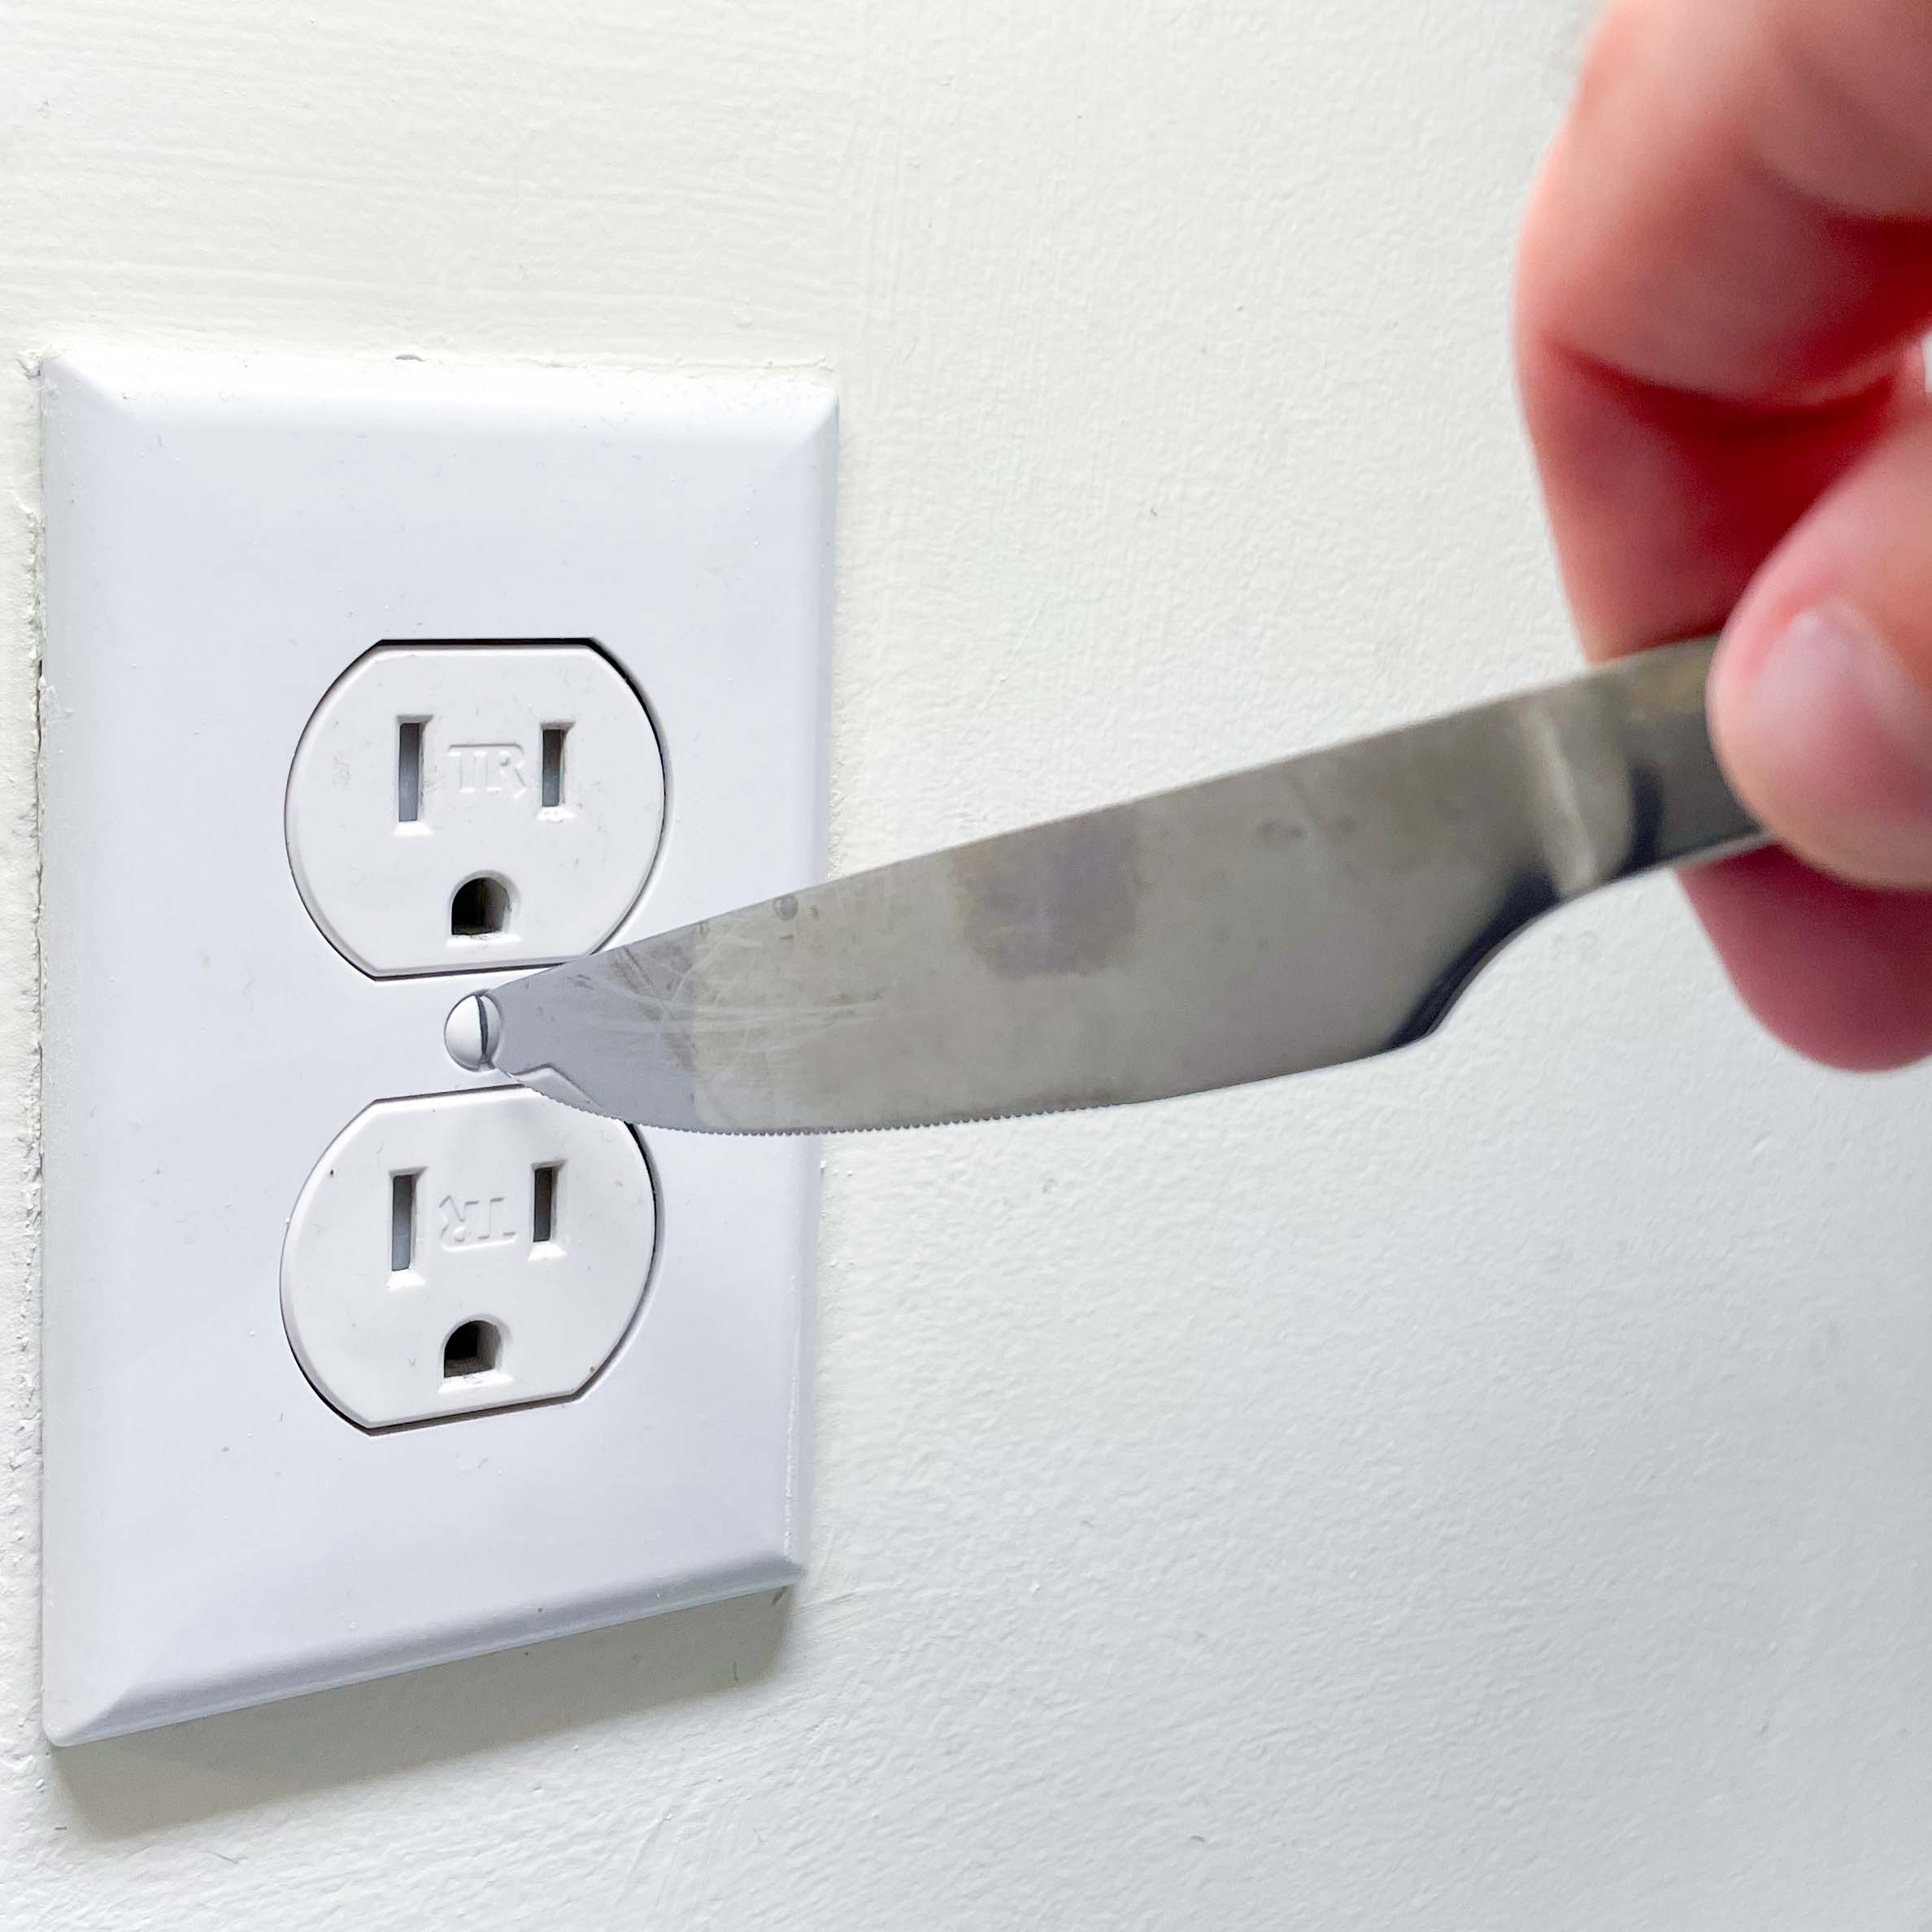 Hand Holding a Knife Tightening an Outlet Screw